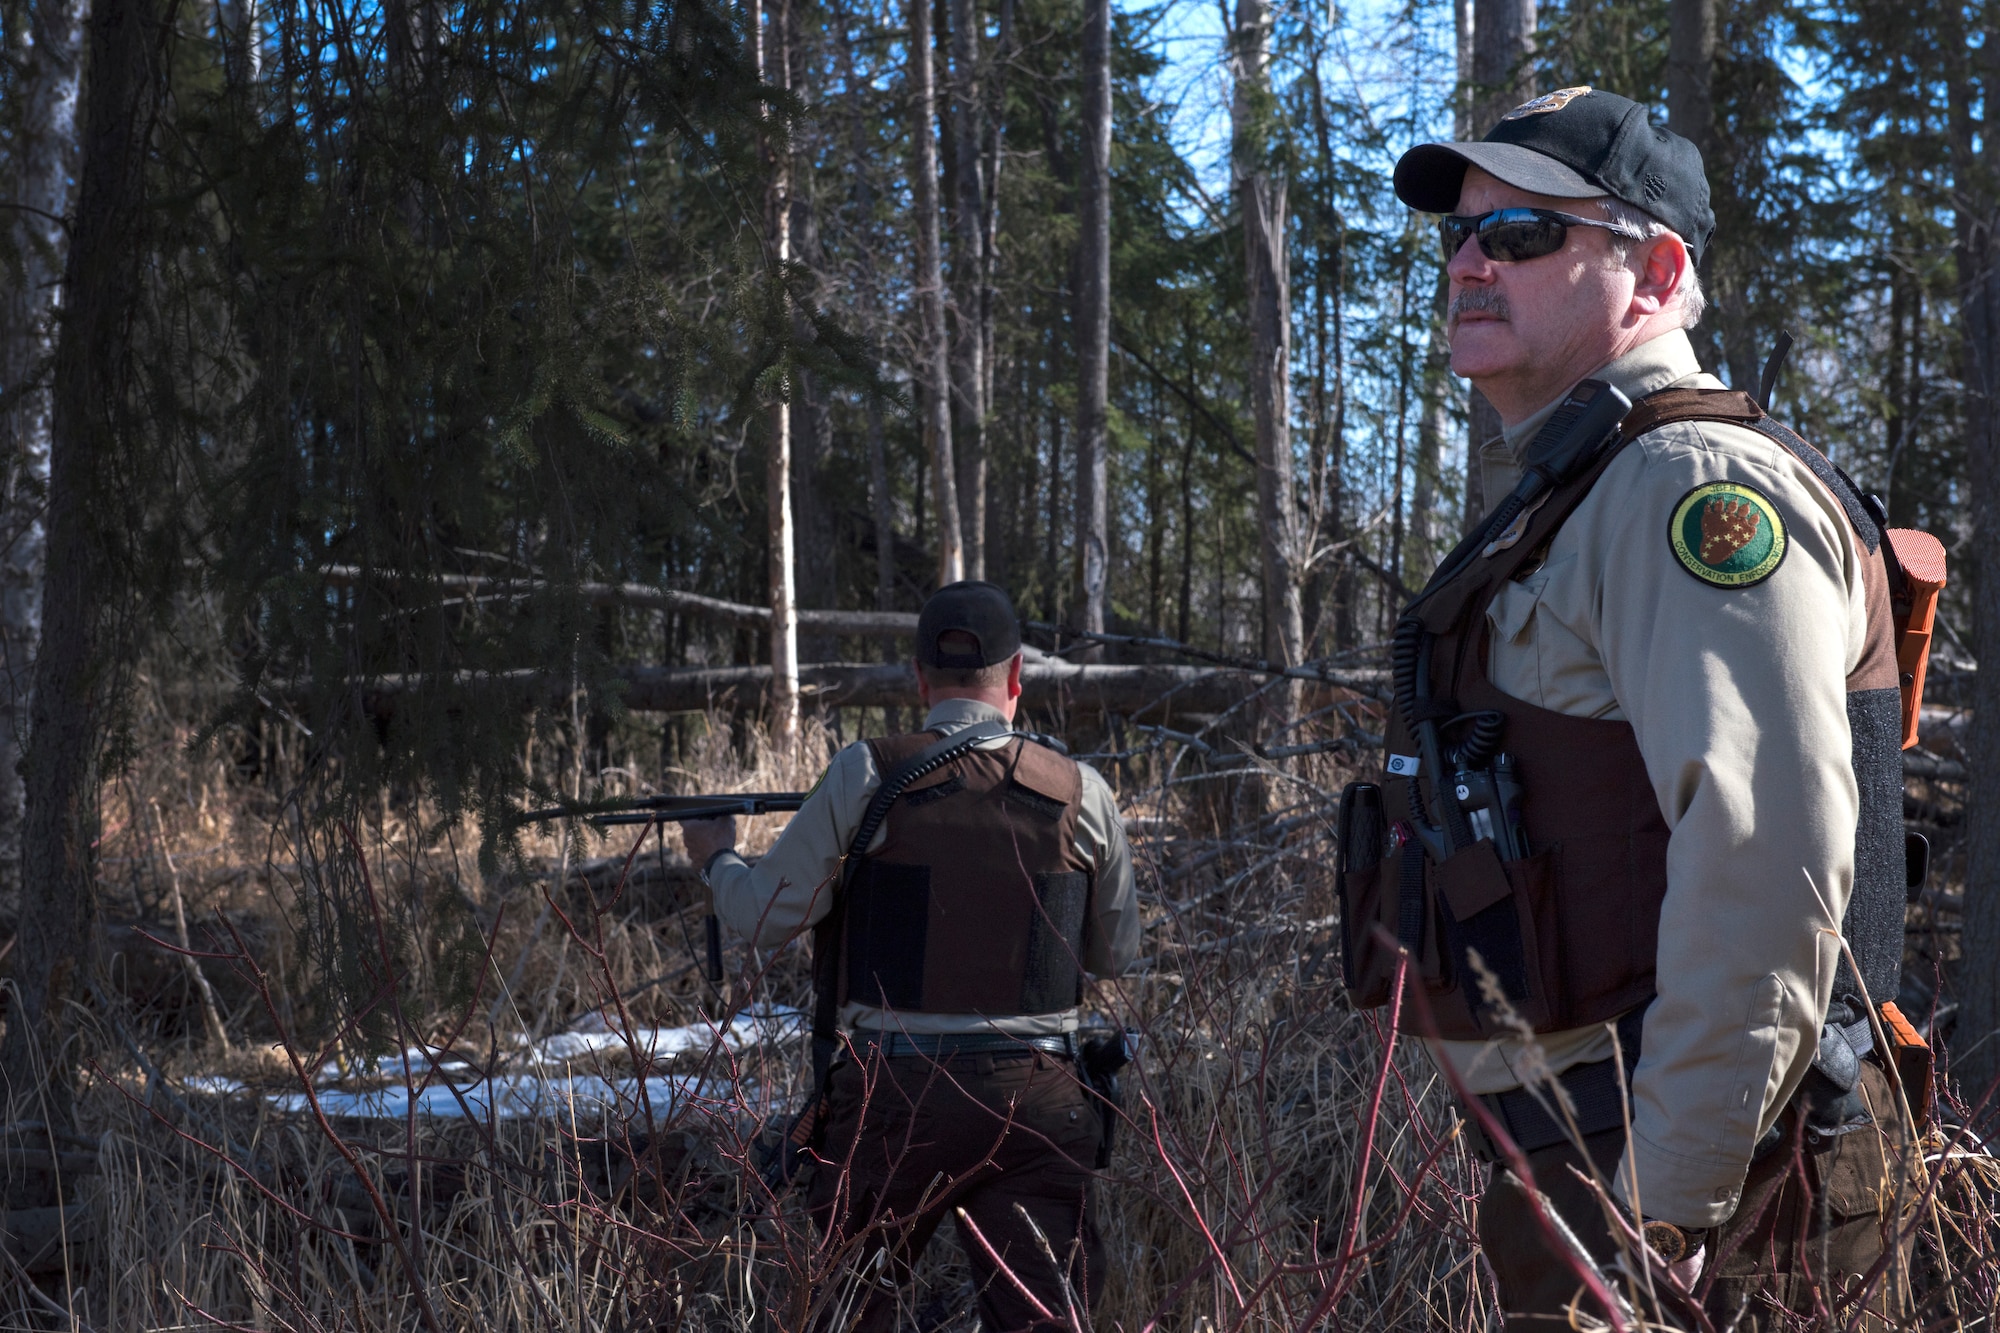 Mark Sledge, 673d Civil Engineering Squadron senior conservation law enforcement officer, and James Wendland, 673 CES chief conservation law enforcement officer, approach a black bear den at Joint Base Elmendorf-Richardson, Alaska, April 16, 2018. Making loud noises while walking the trails will alert the wildlife of your presence and reduce a surprise encounter.